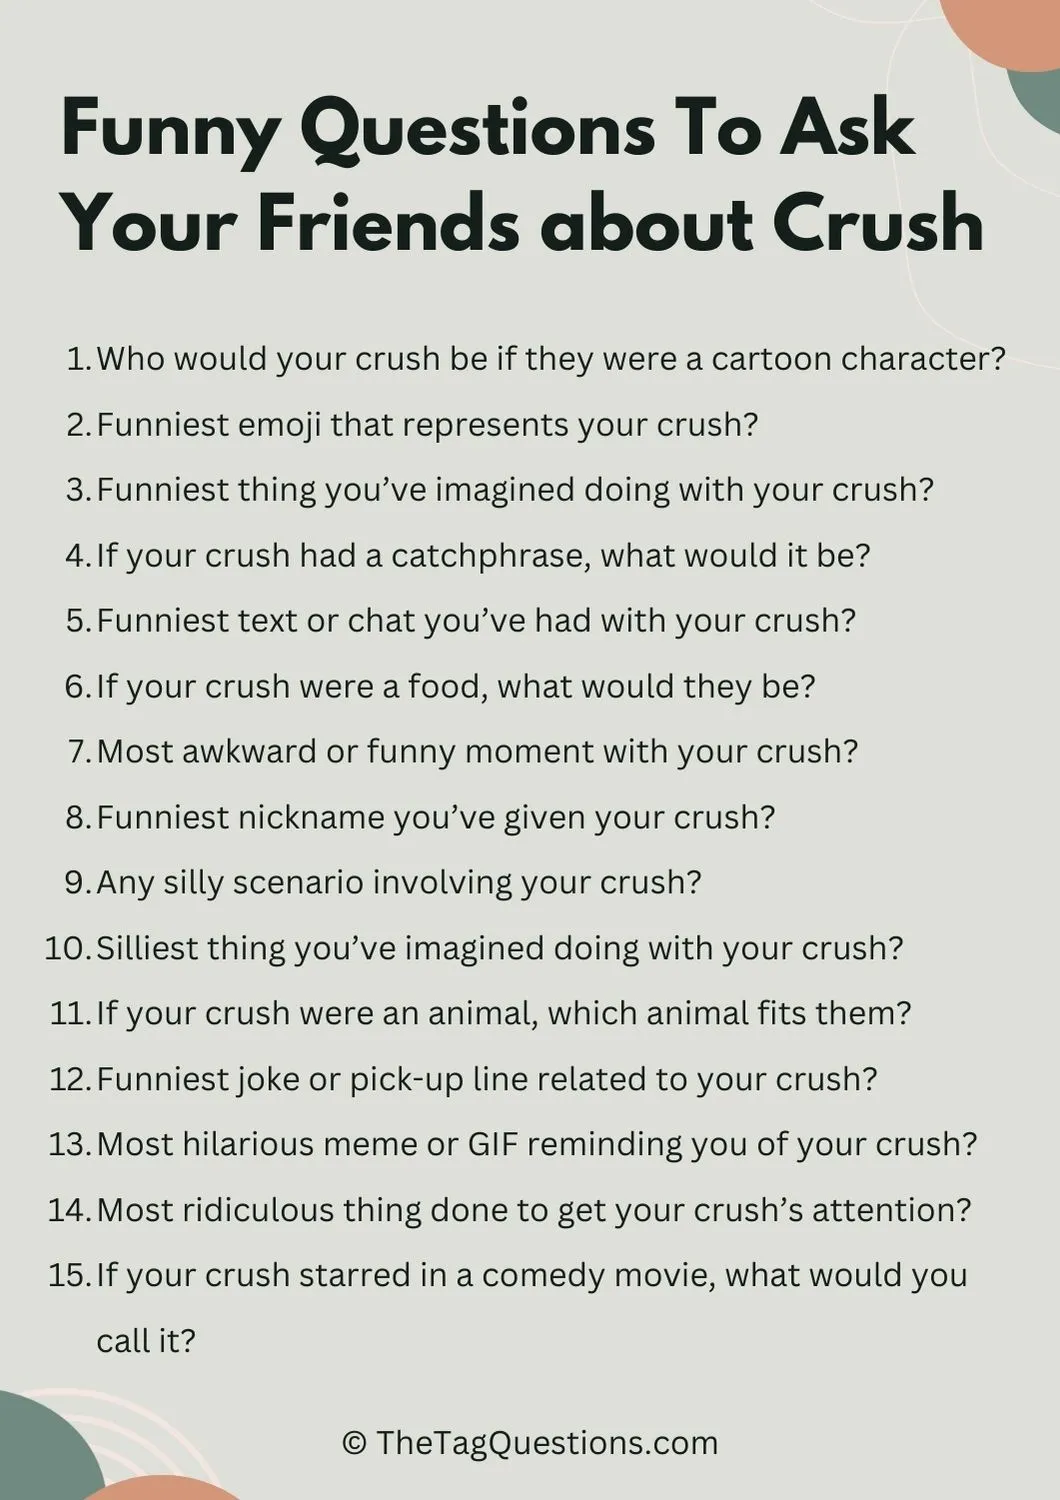 Funny Questions To Ask Your Friends about Crush